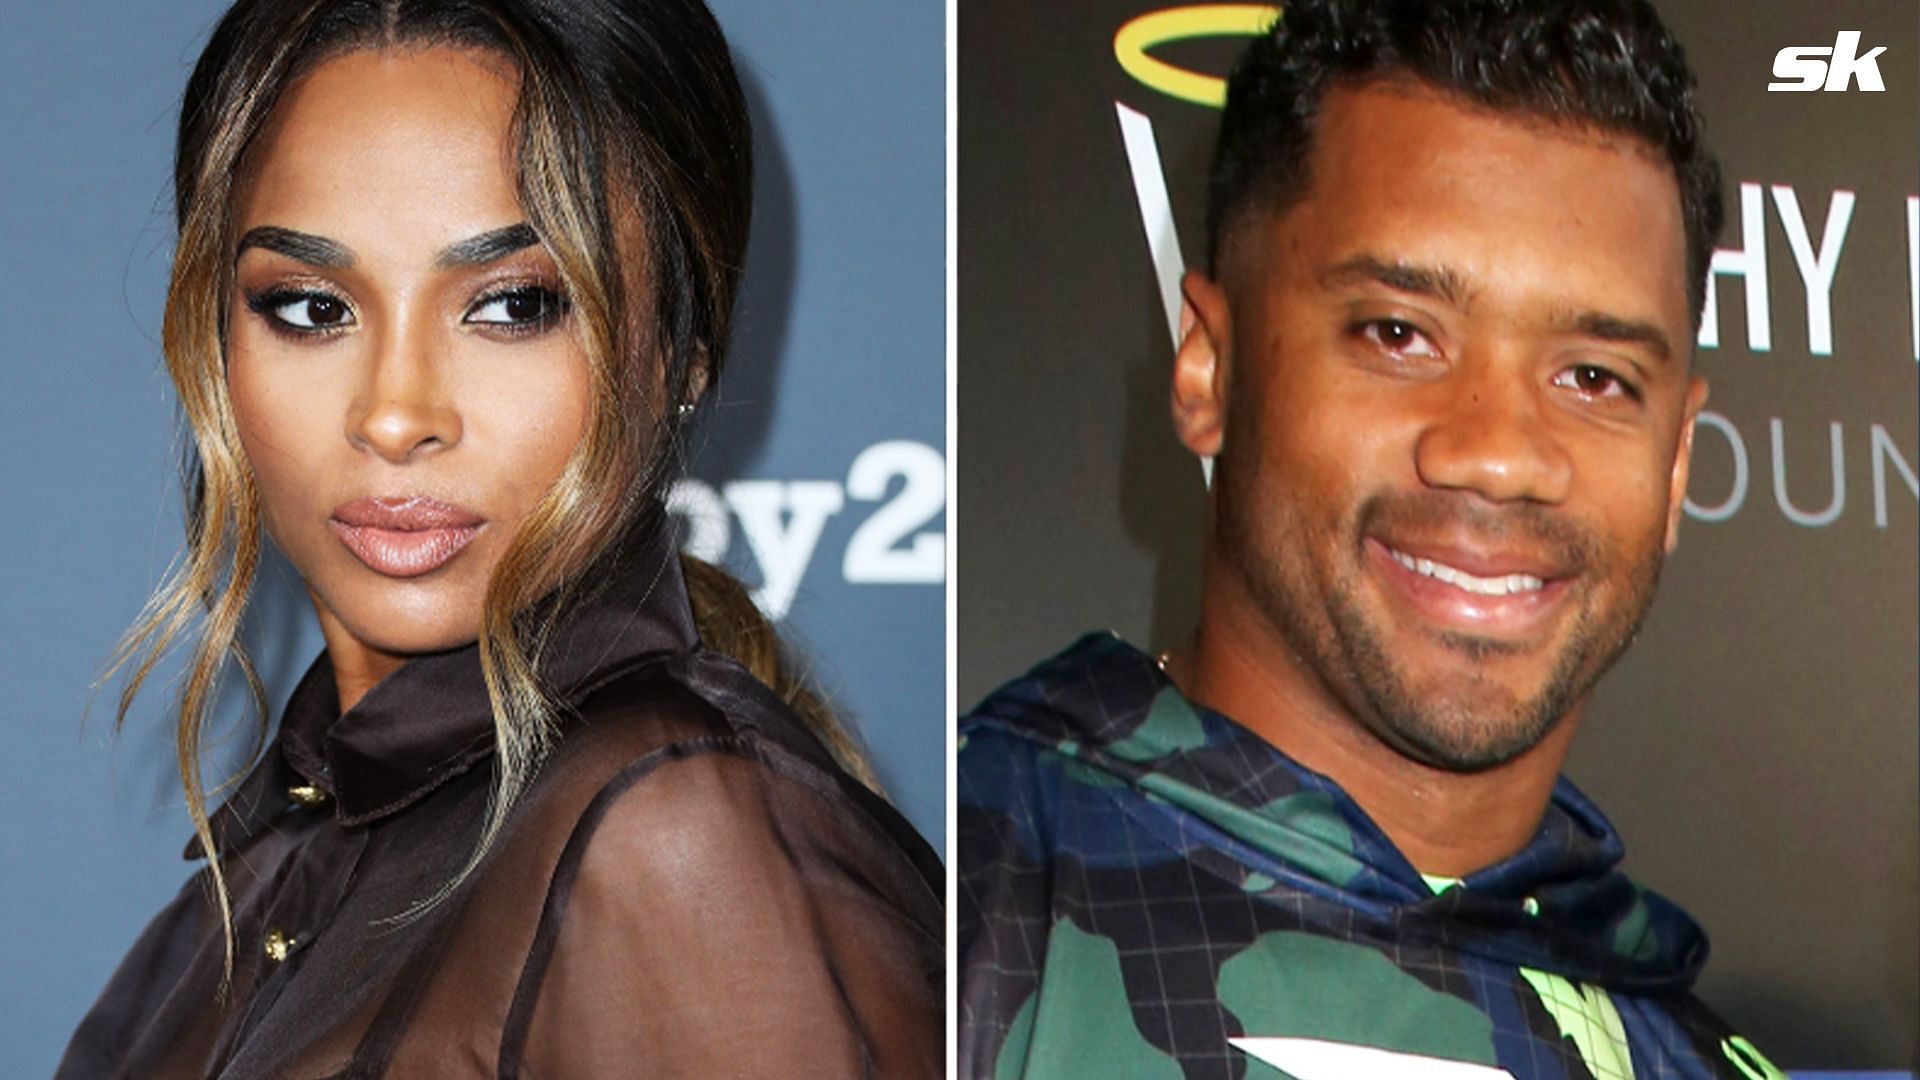 Quarterback Russell Wilson and wife Ciara